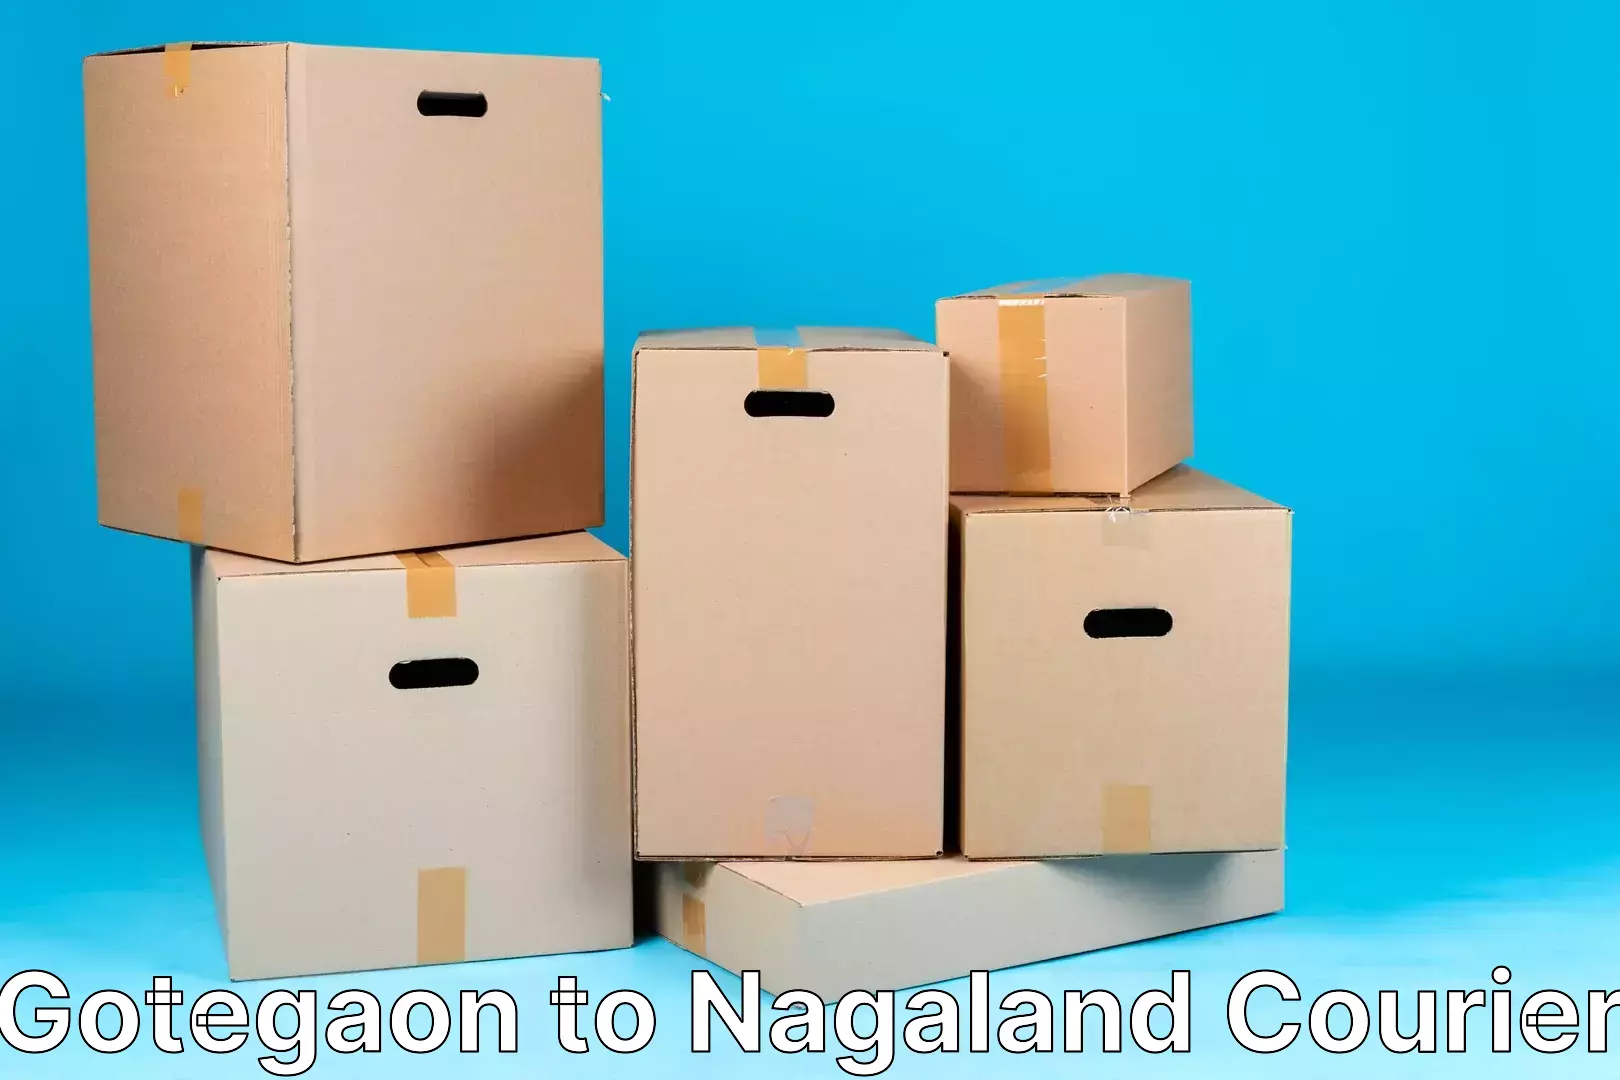 Global shipping solutions Gotegaon to Nagaland